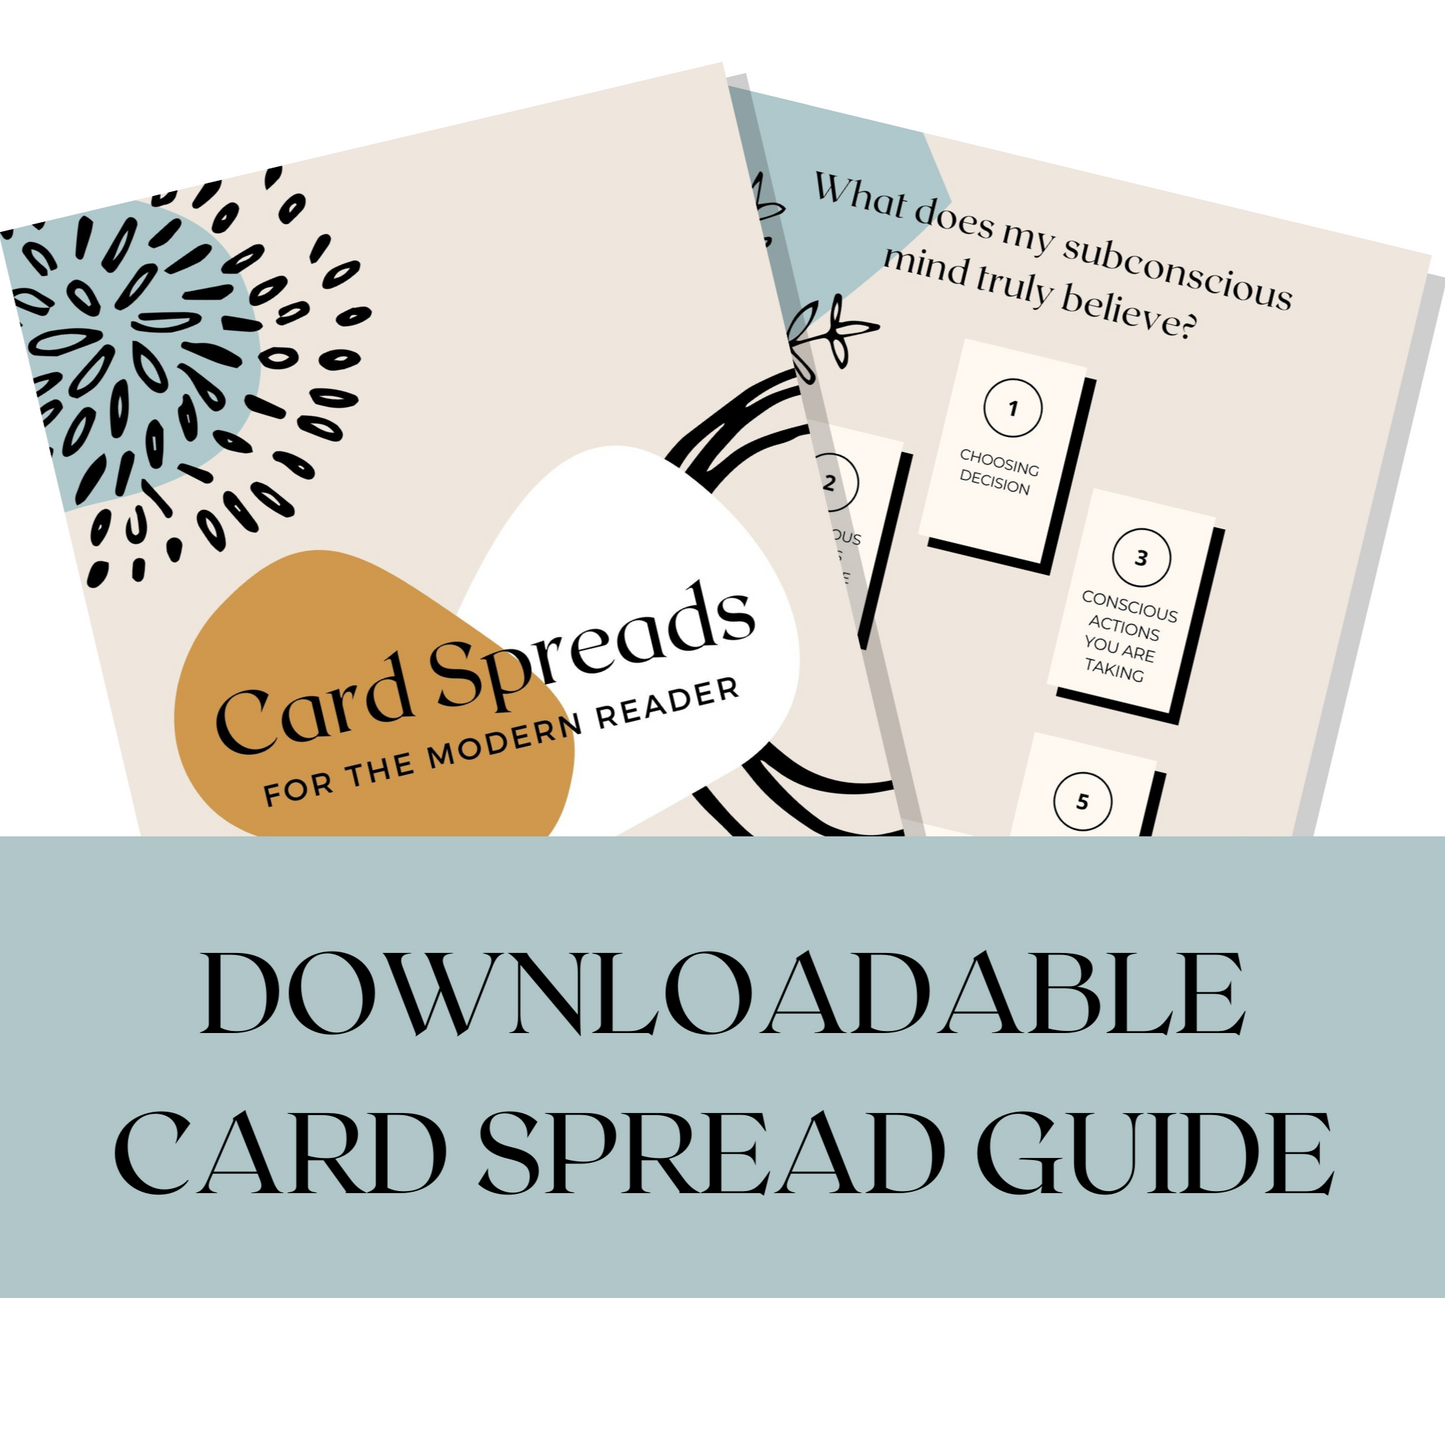 Card Spreads for the Modern Reader